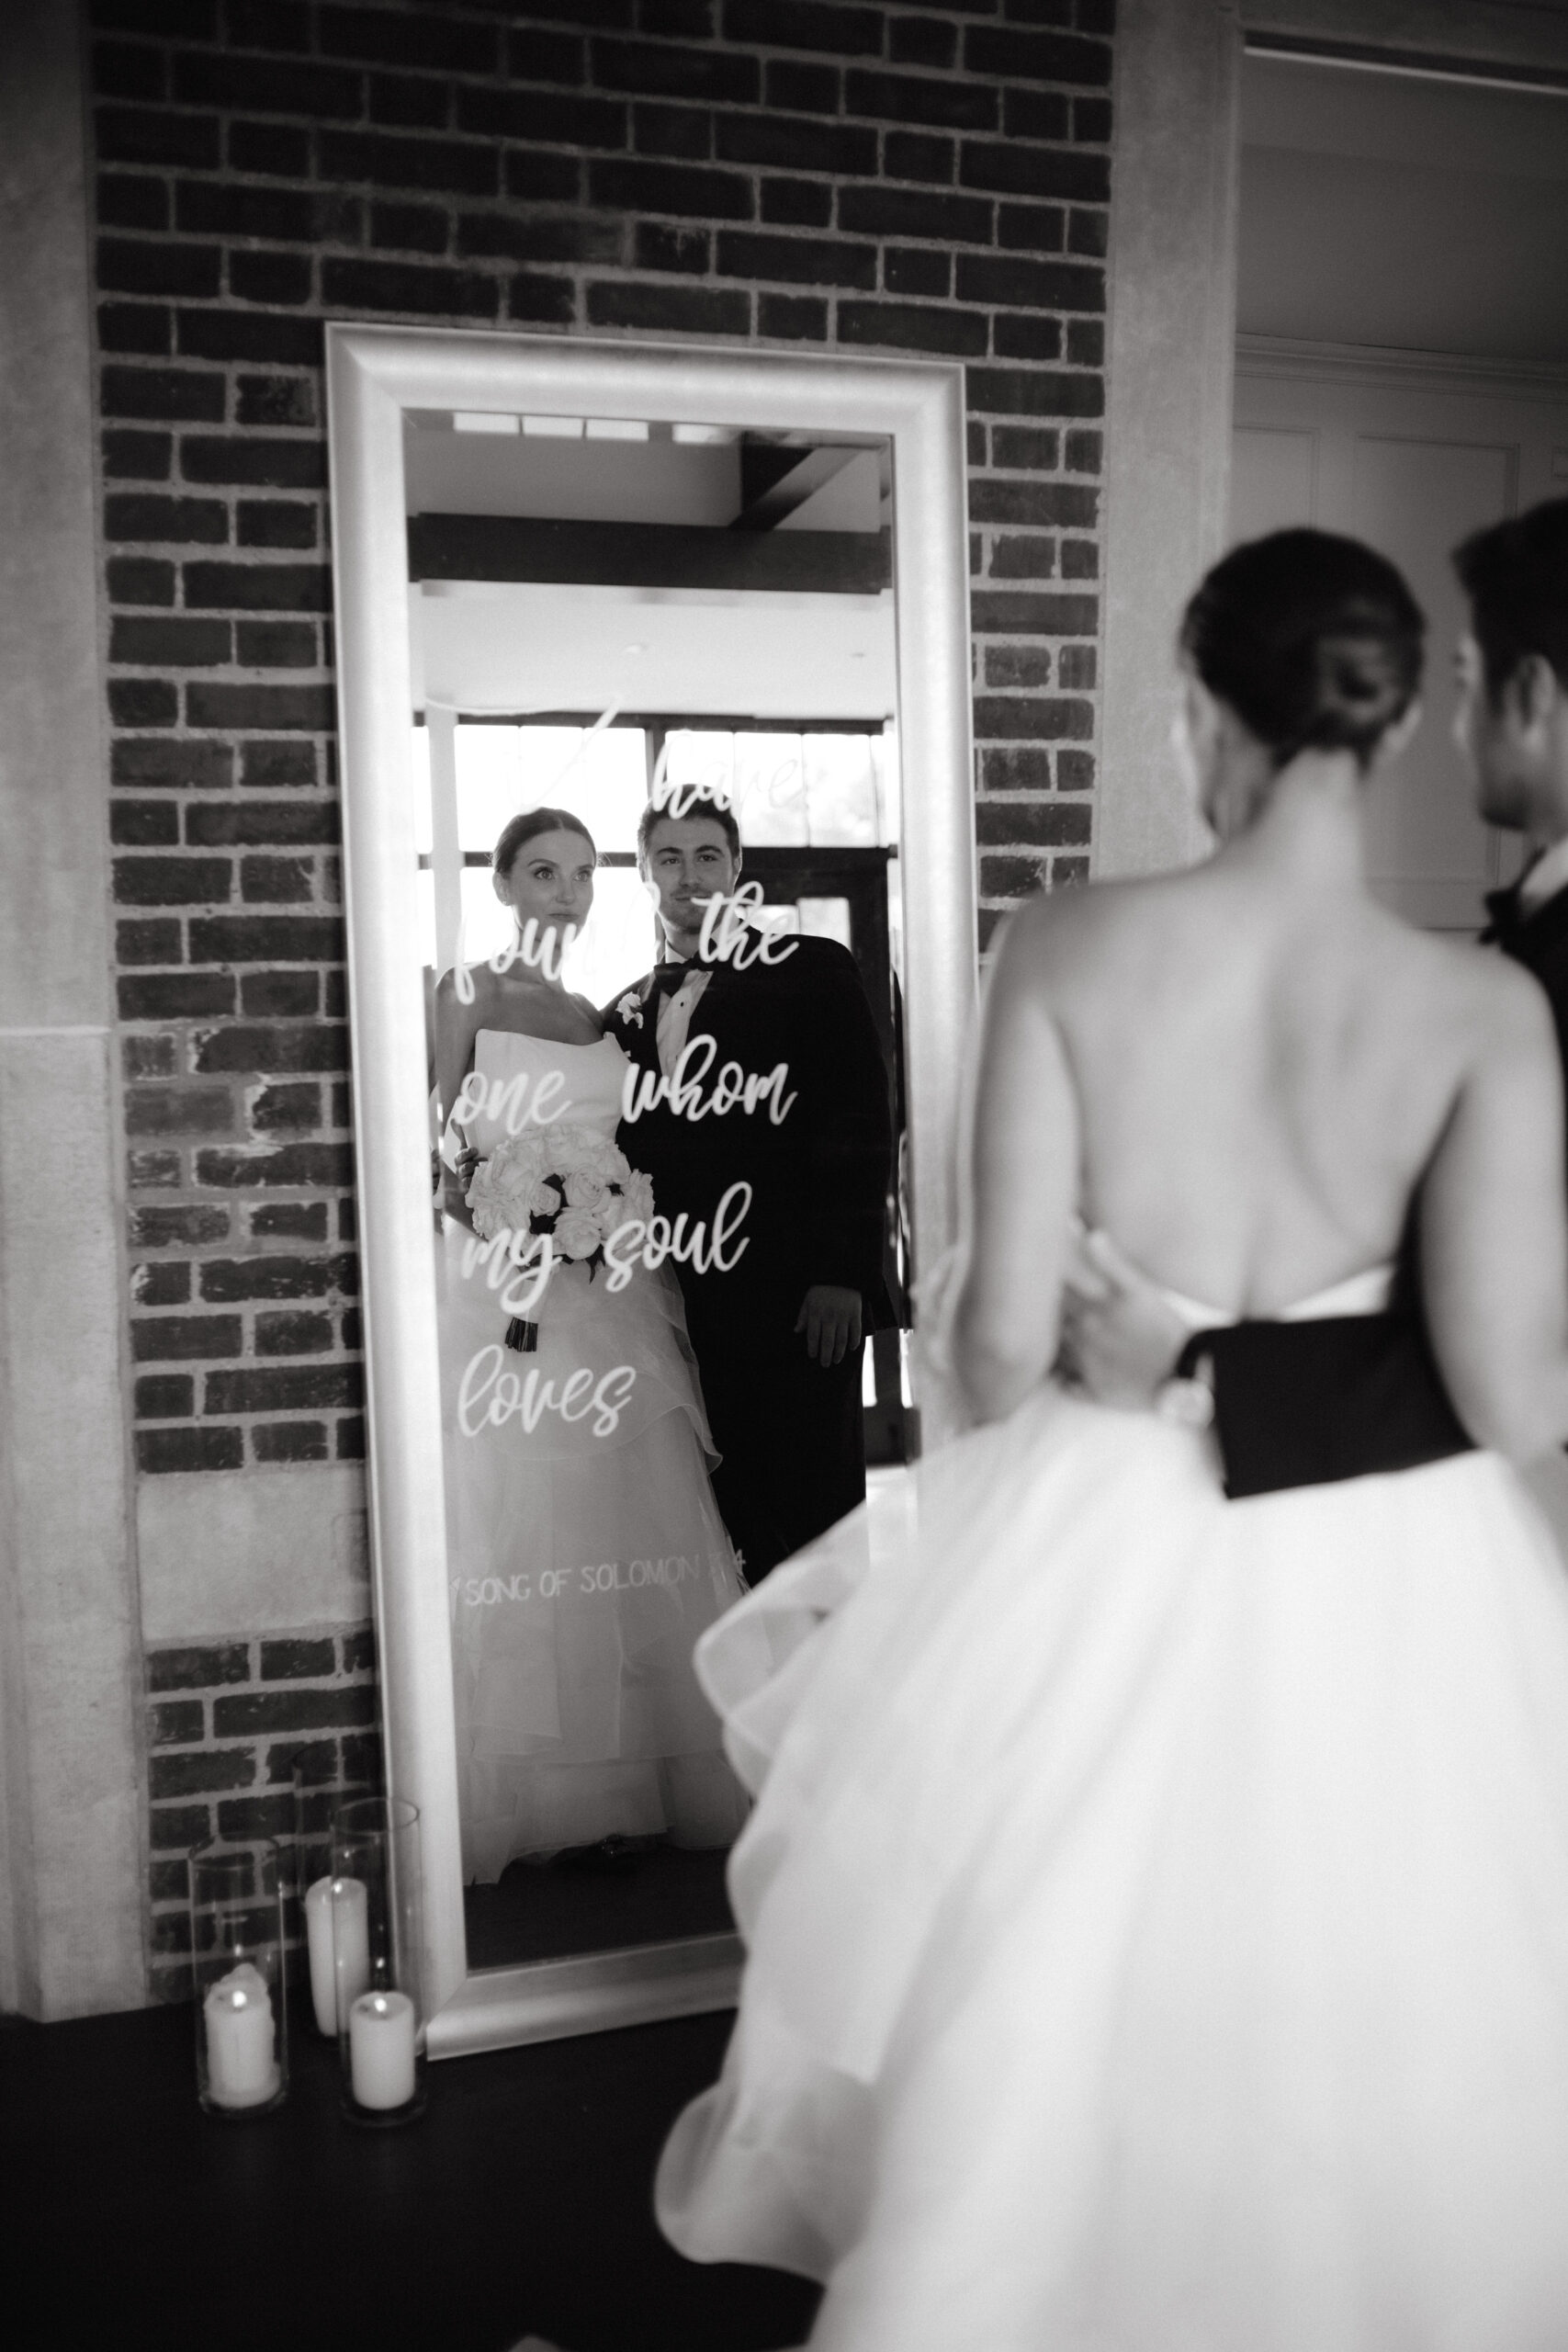 Editorial image of the bride and groom looking at a mirror. Timeless wedding photography Image by Jenny Fu Studio